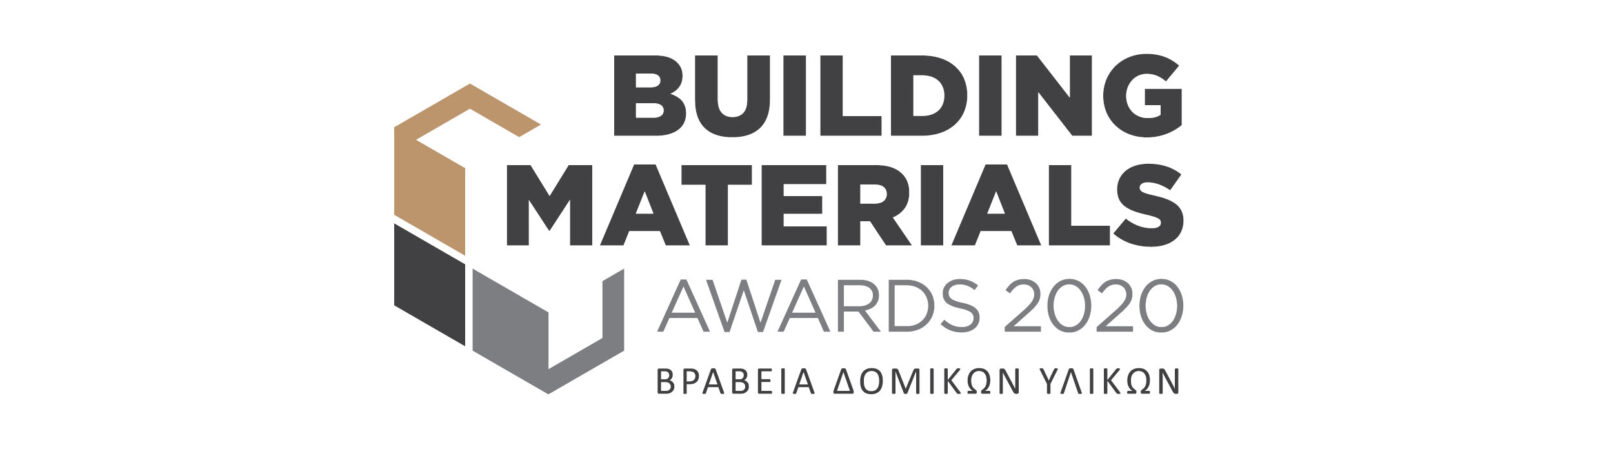 Archisearch Building Materials Awards 2020  |  OPEN CALL